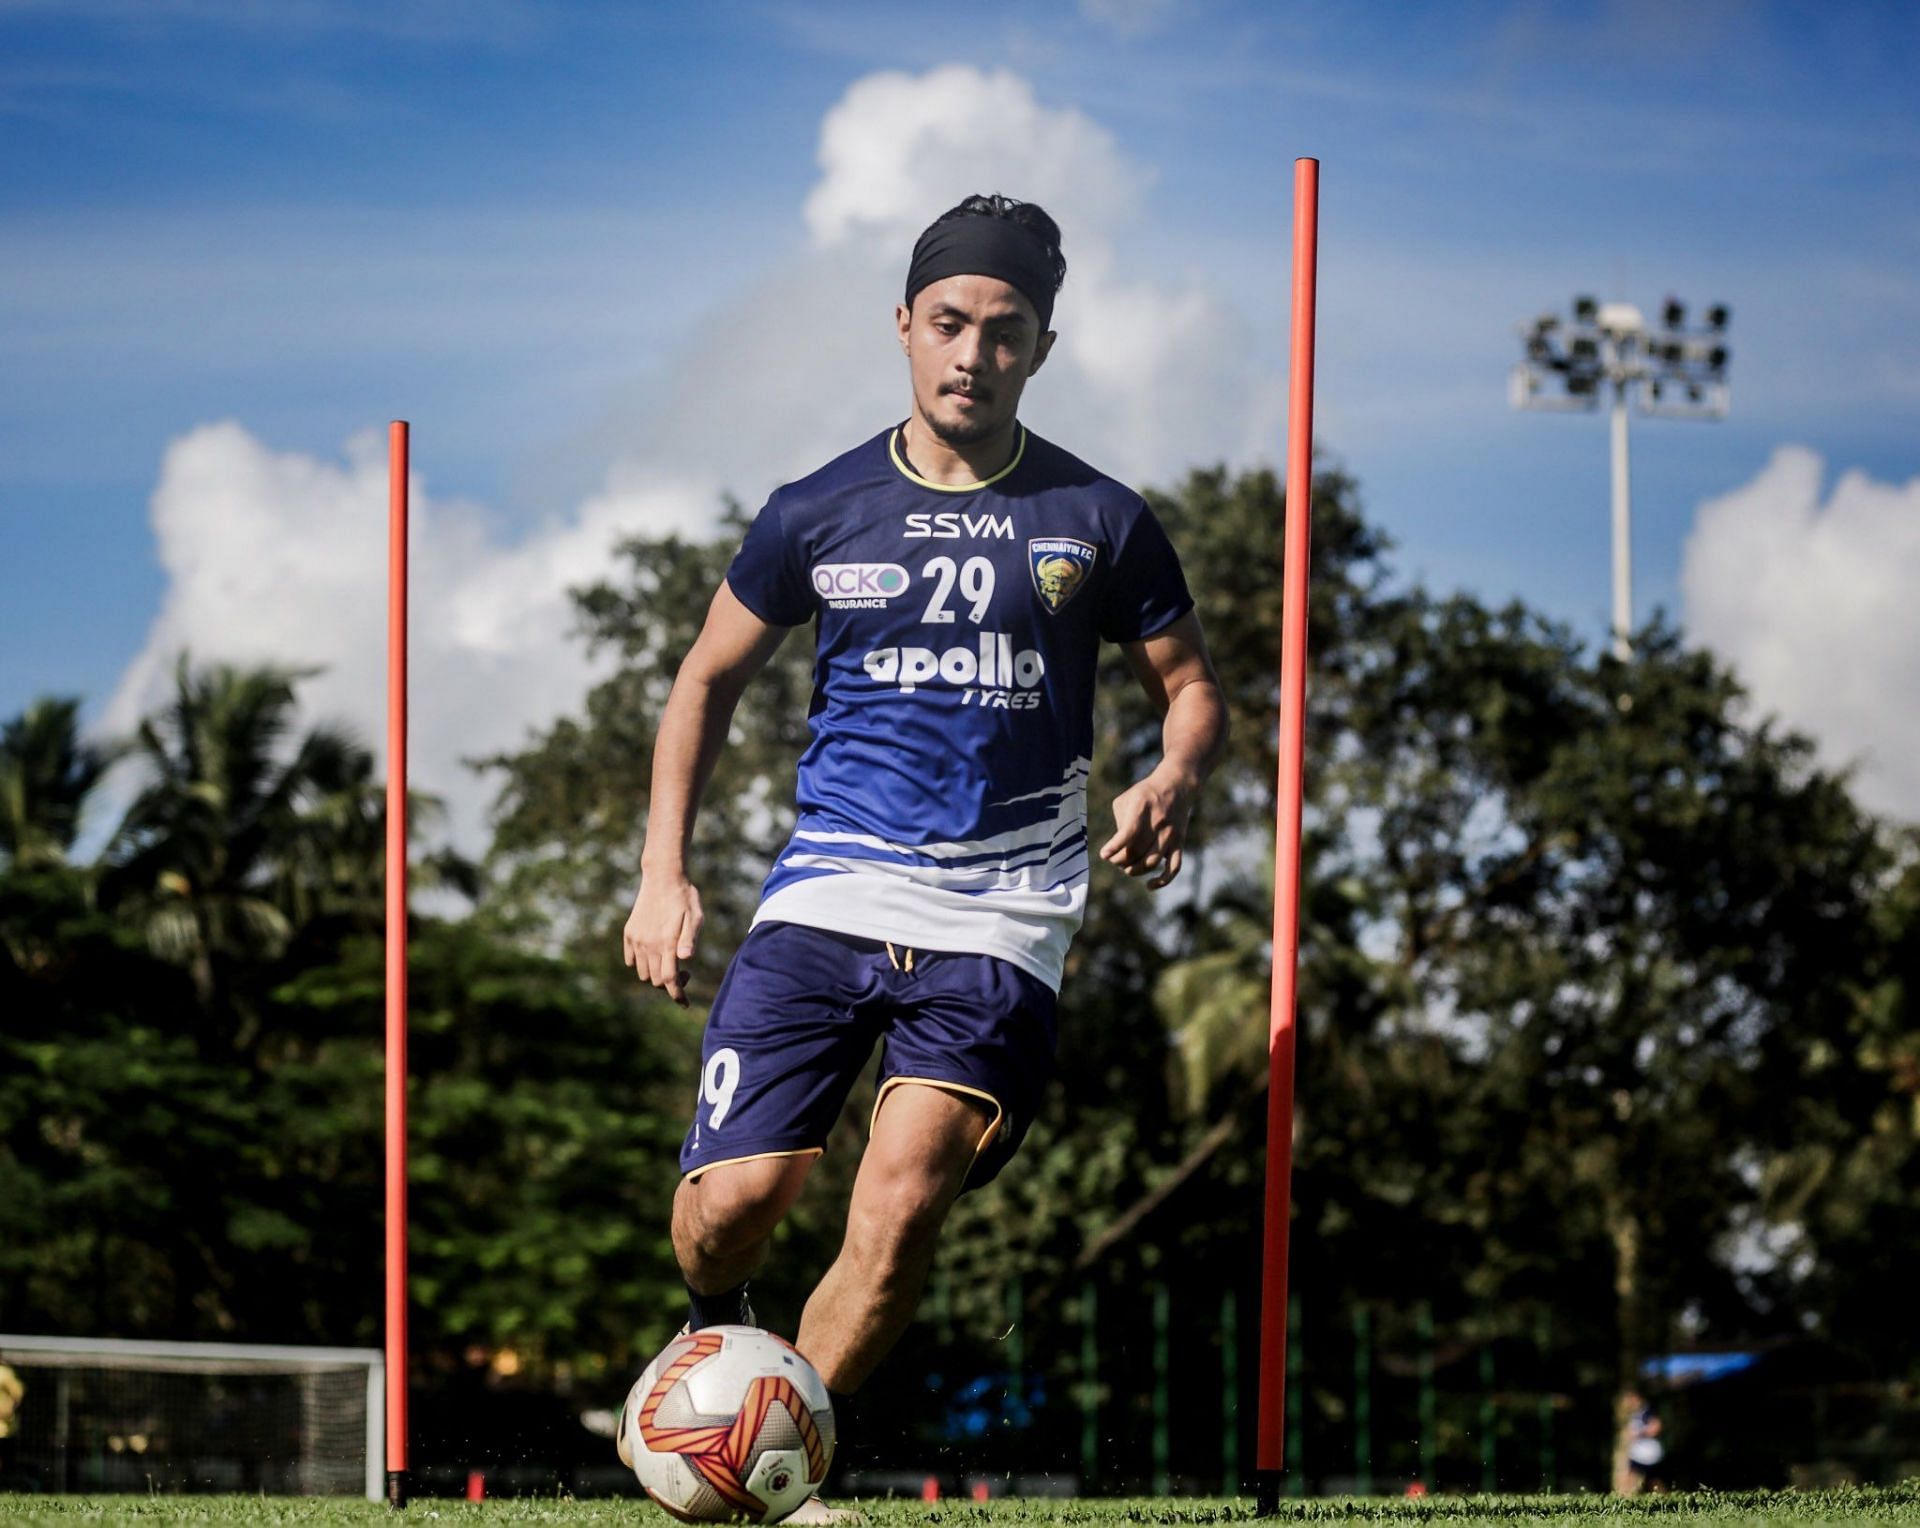 Aman Chetri in action for CFC during a training session - Image Courtesy: Chennaiyin FC Twitter